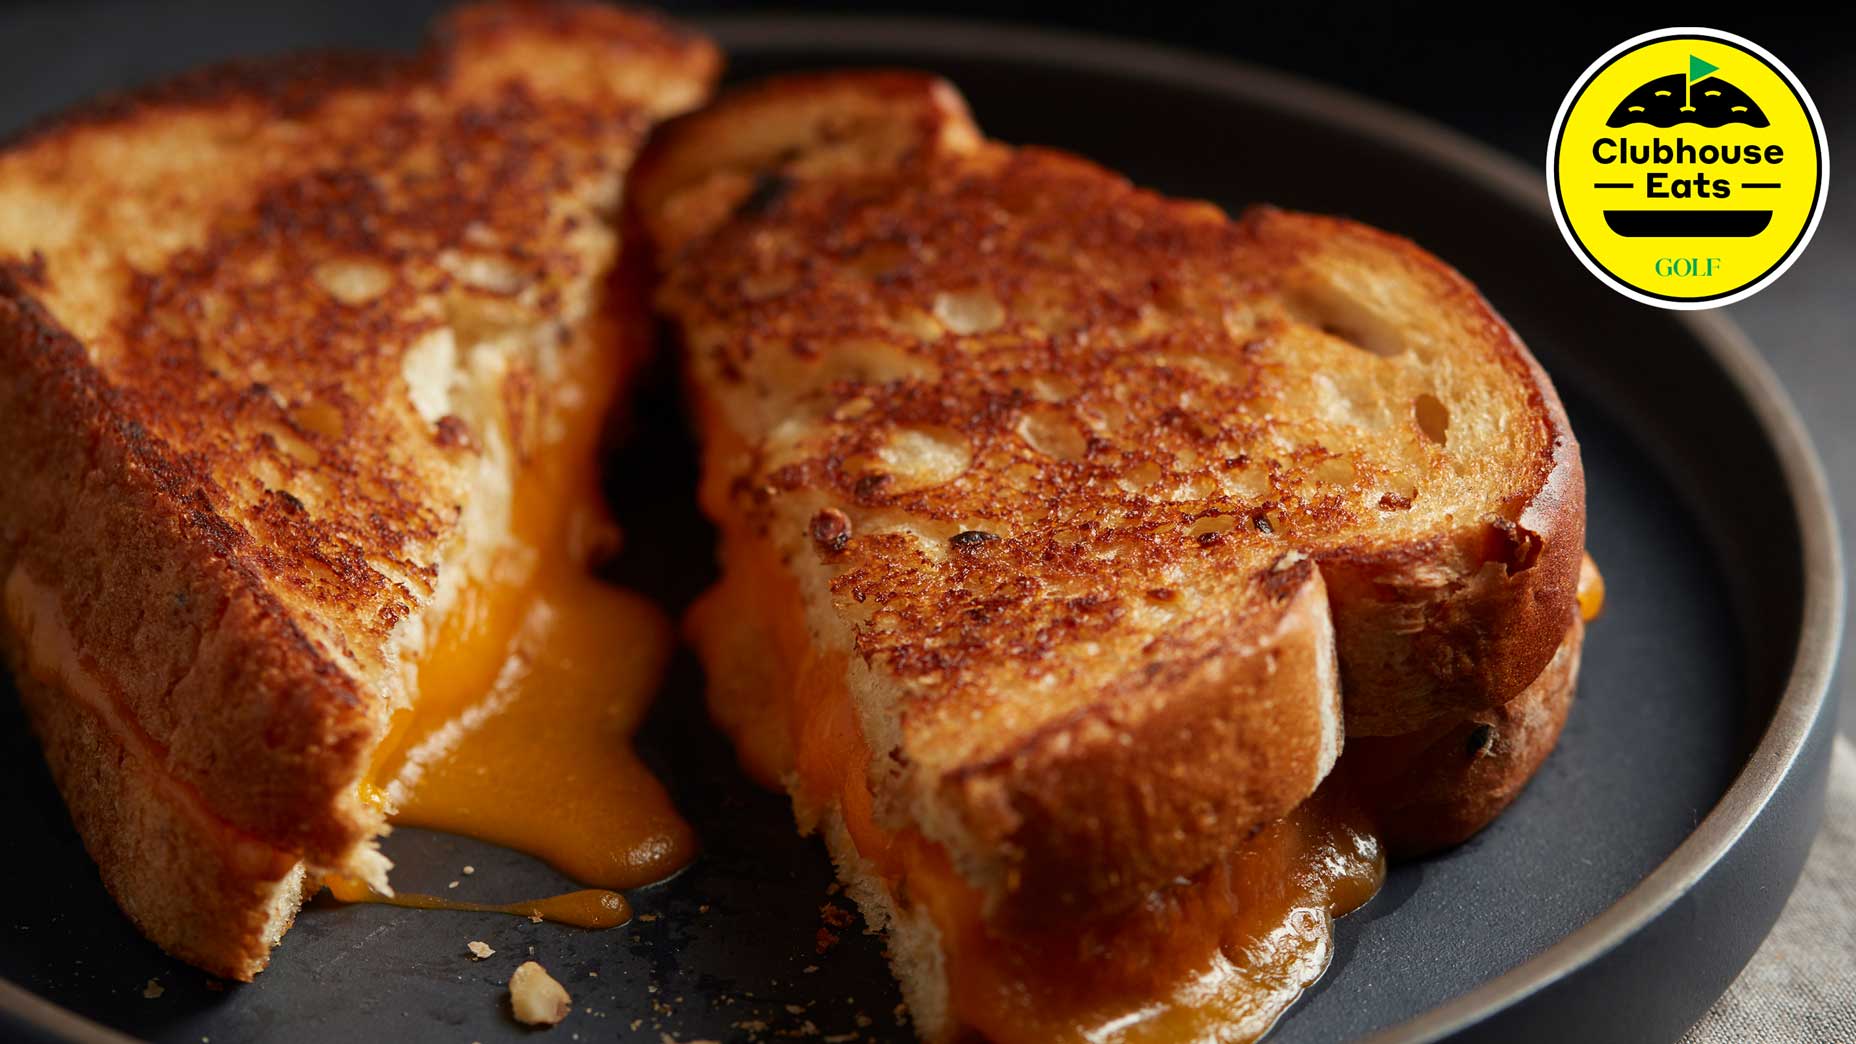 https://golf.com/wp-content/uploads/2021/02/Grilled-cheese-clubhouse-eats.jpg